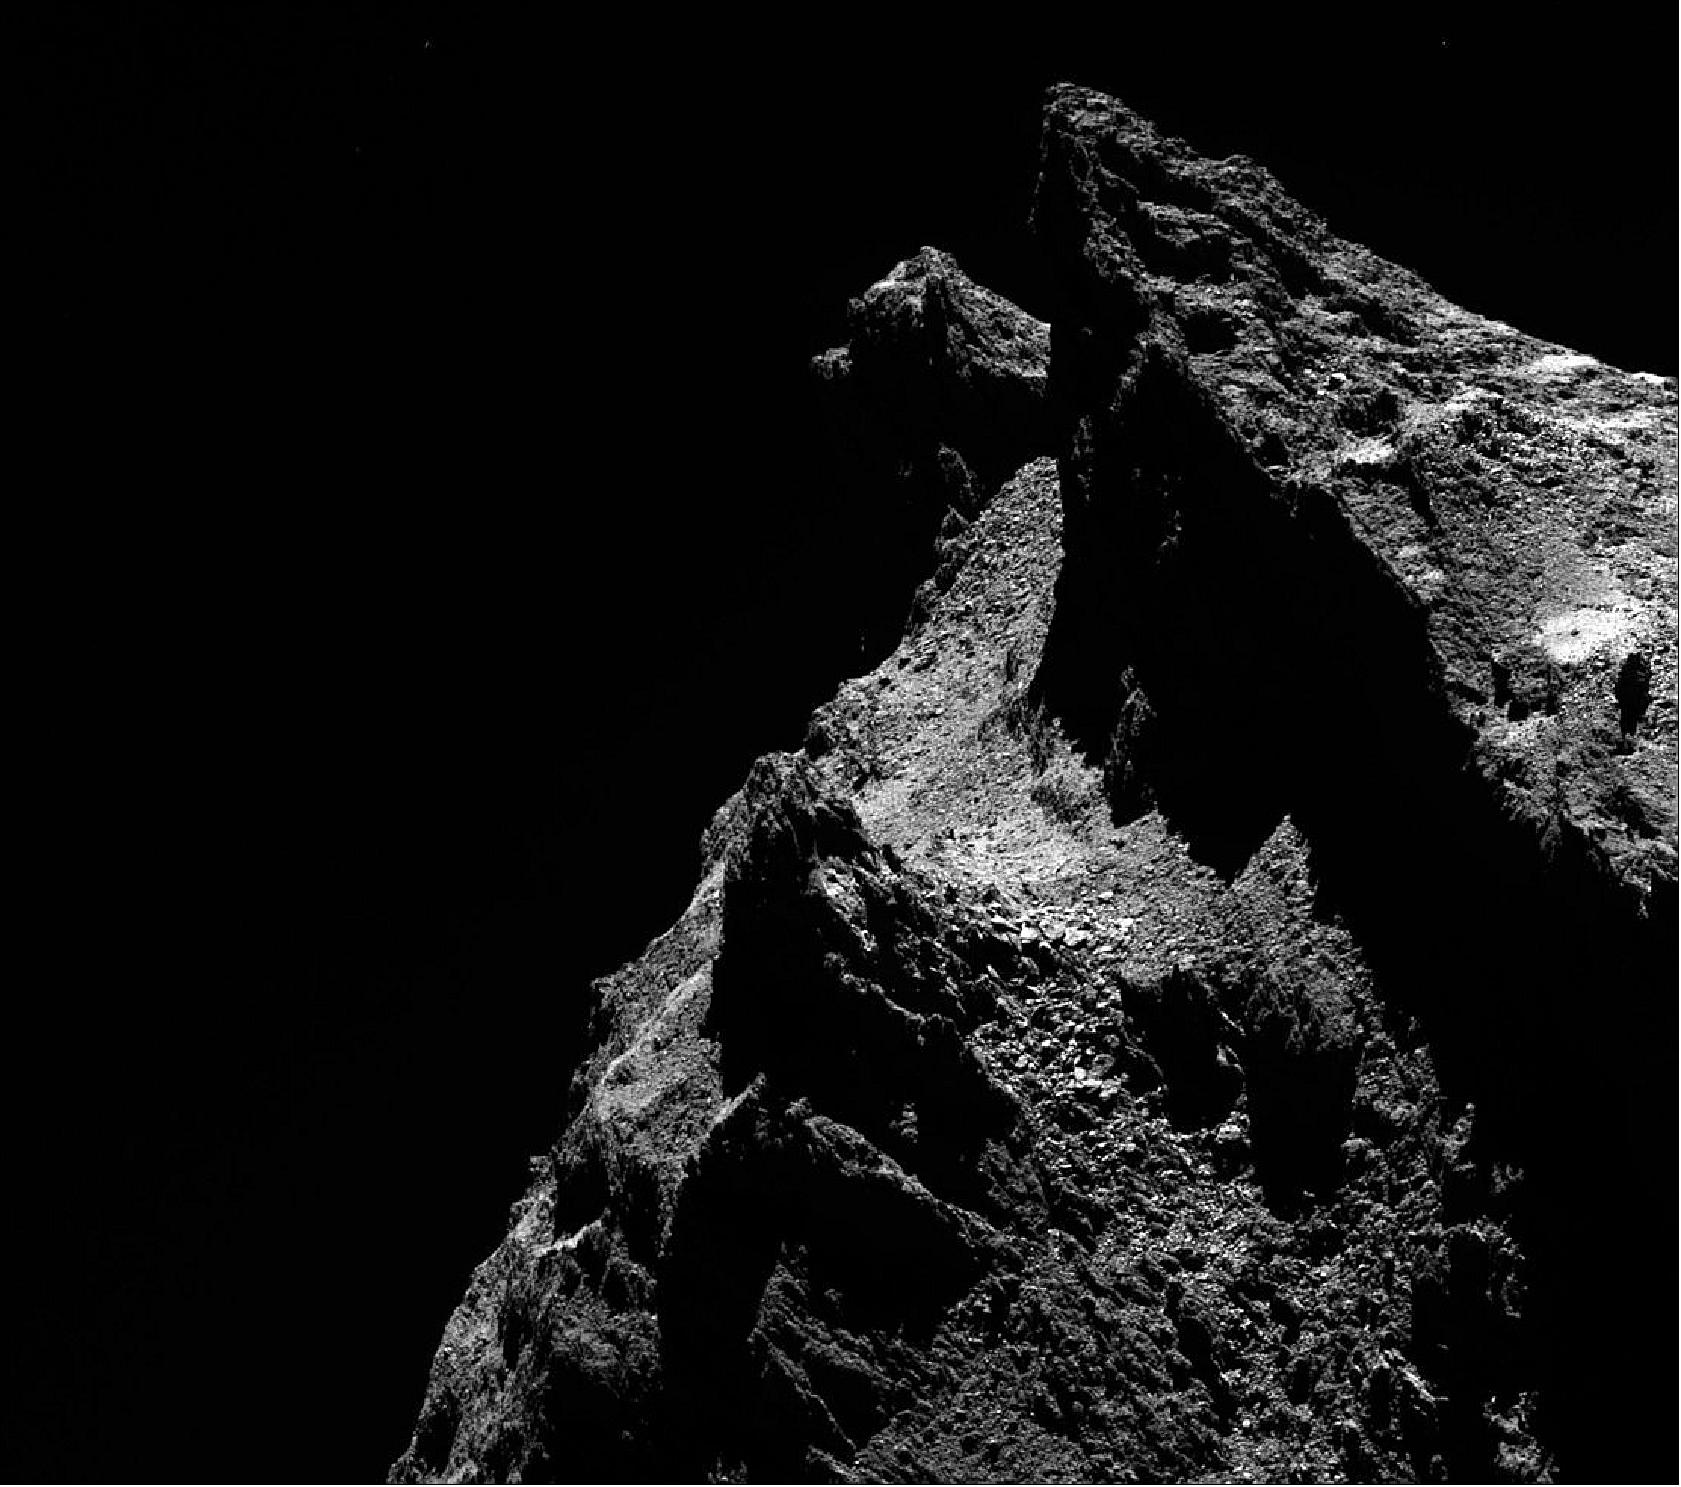 Figure 58: Seen from afar, the comet is usually likened to a duck in shape, but in this enchanting close-up view its profile resembles that of a cat's face seen side-on. The two ‘ears' of the cat make up the twin peaks either side of the ‘C. Alexander Gate' – named for US Rosetta Project Scientist Claudia Alexander who passed away in July 2015. These impressive cliffs lie at the border between the Serqet and Anuket regions on the comet's head. The image was taken on 6 October 2014 from a distance of 18.6 km to the comet [image credit: ESA/Rosetta/MPS for OSIRIS Team MPS/UPD/LAM/IAA/SSO/INTA/UPM/DASP/IDA (CC BY-SA 4.0)]